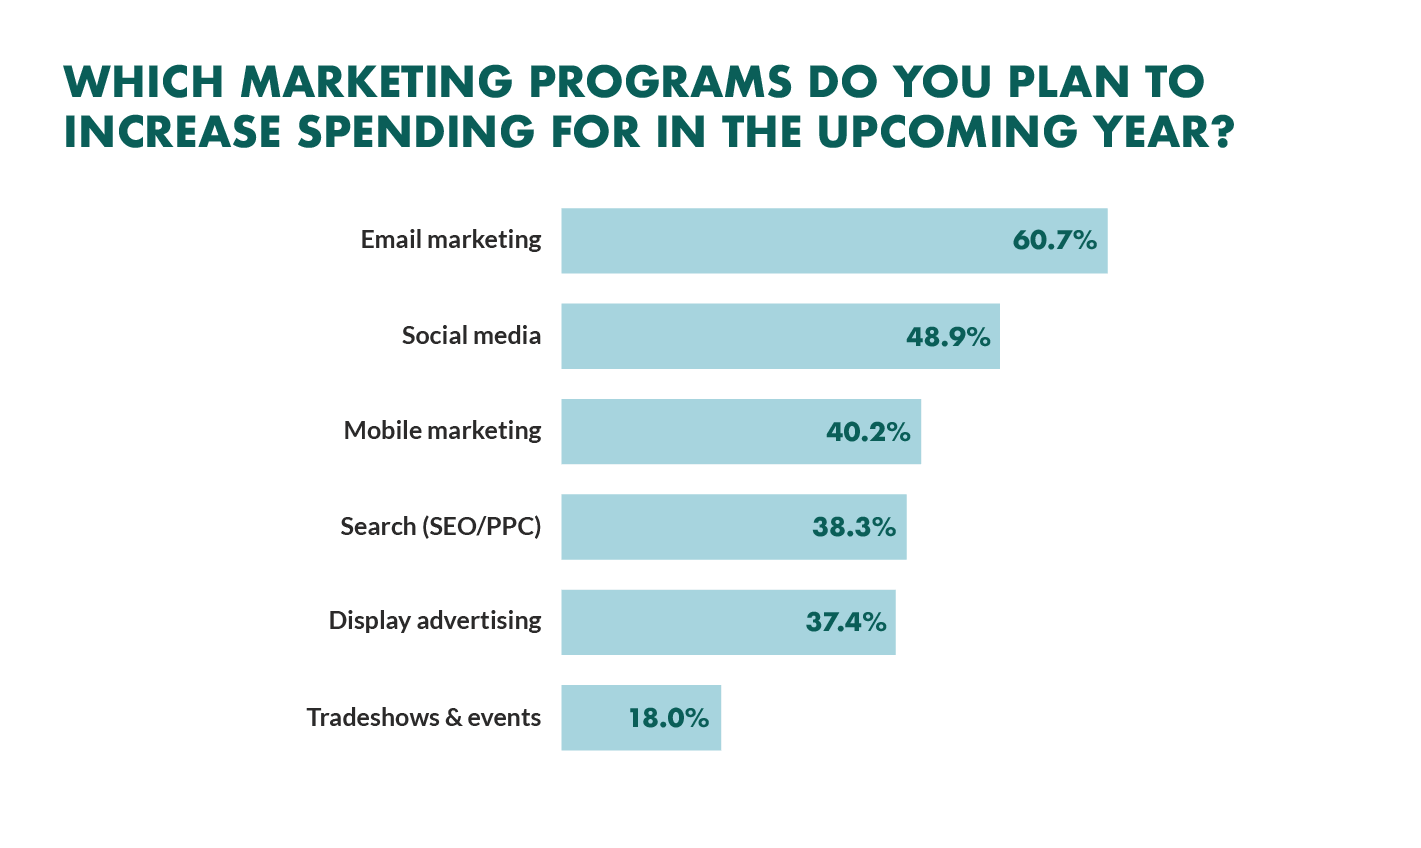 Which marketing programs do you plan to increase spending for in the upcoming year